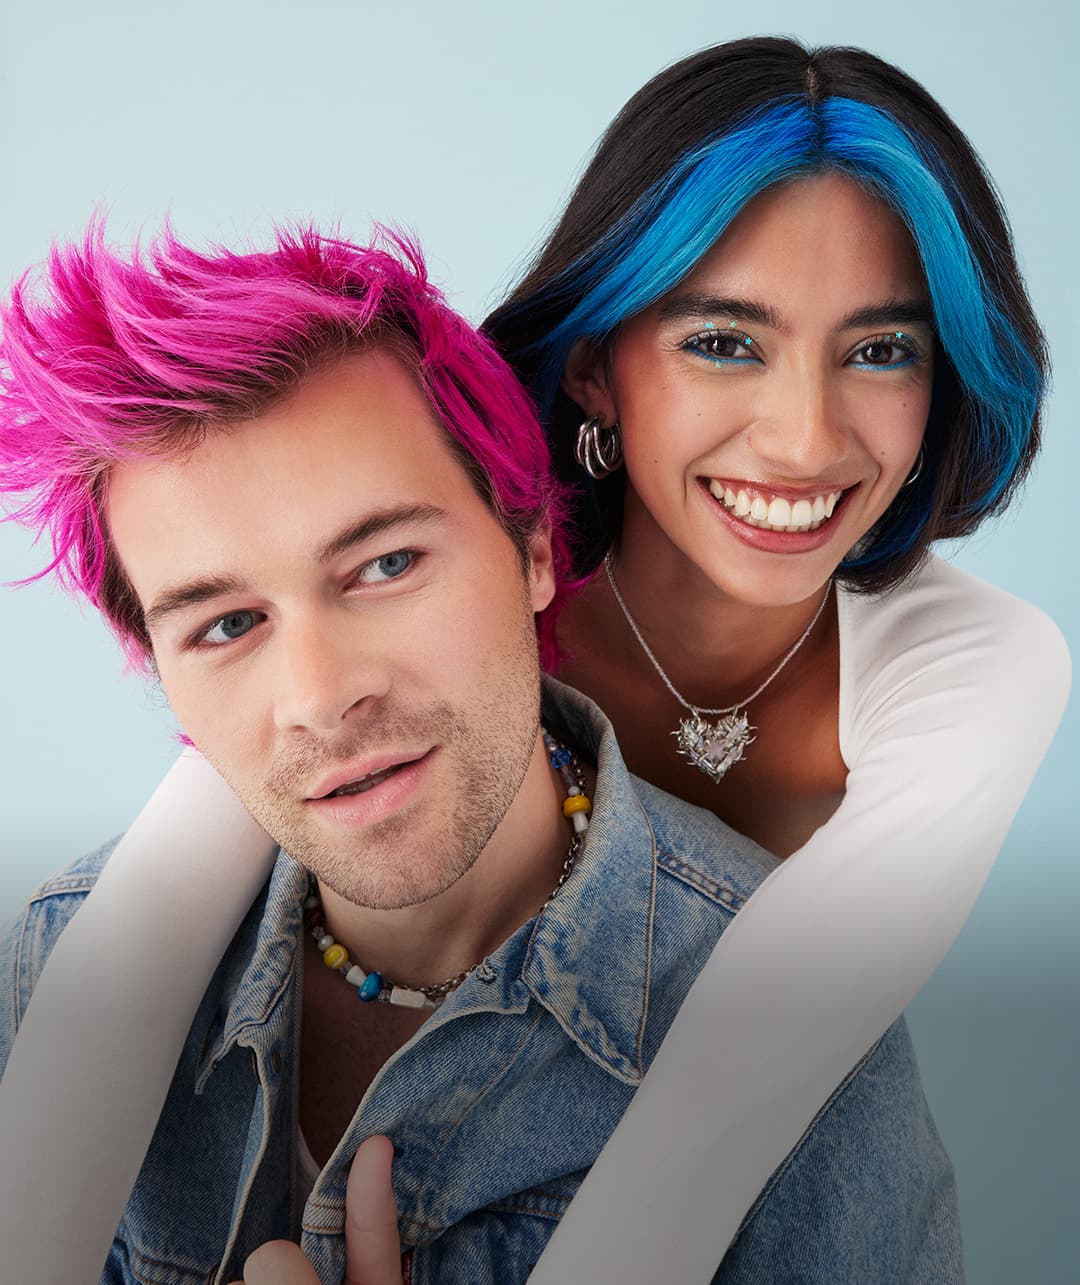 Portrait of a smiling couple showcasing Arctic Fox hair colors, with the man sporting vibrant Virgin Pink and the woman featuring bold Aquamarine highlights, both exuding style and confidence.